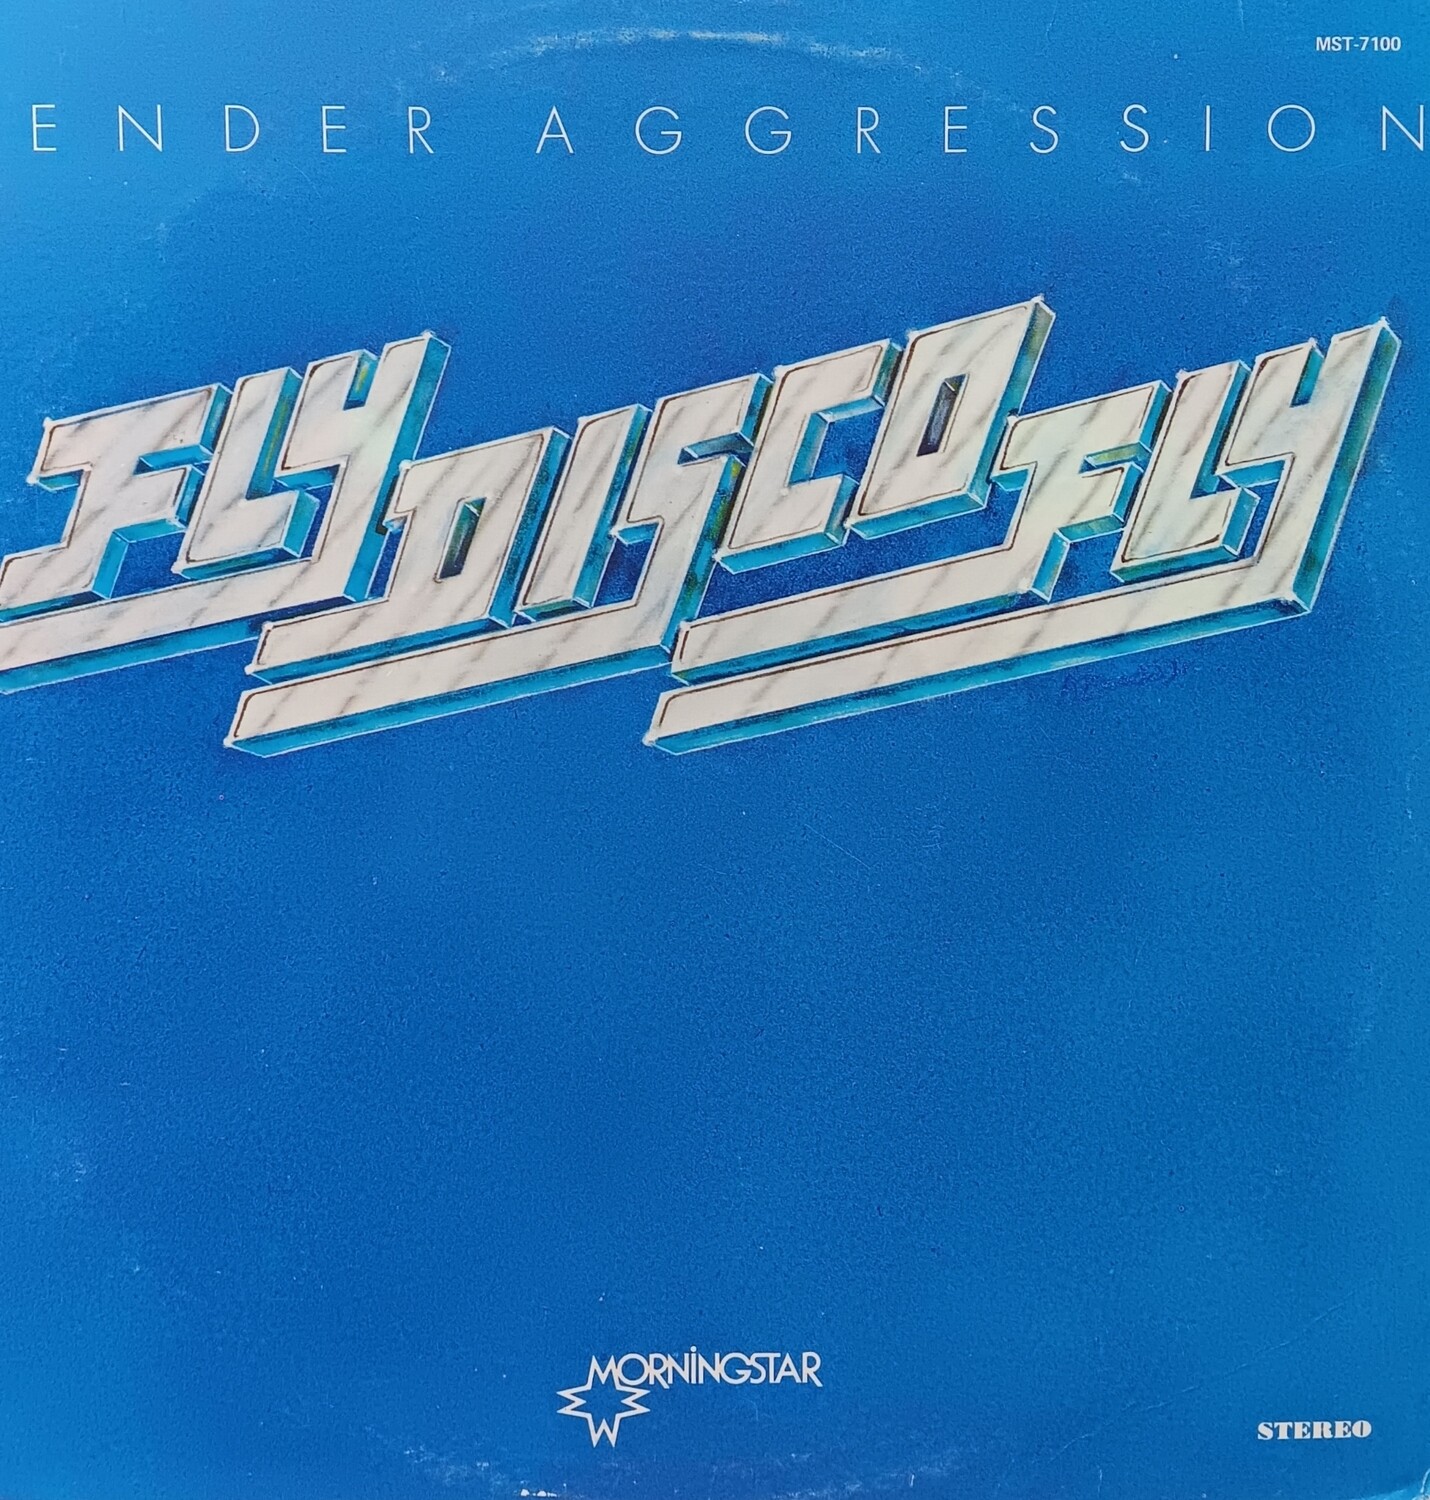 TENDER AGGRESSION - Fly Disco Fly